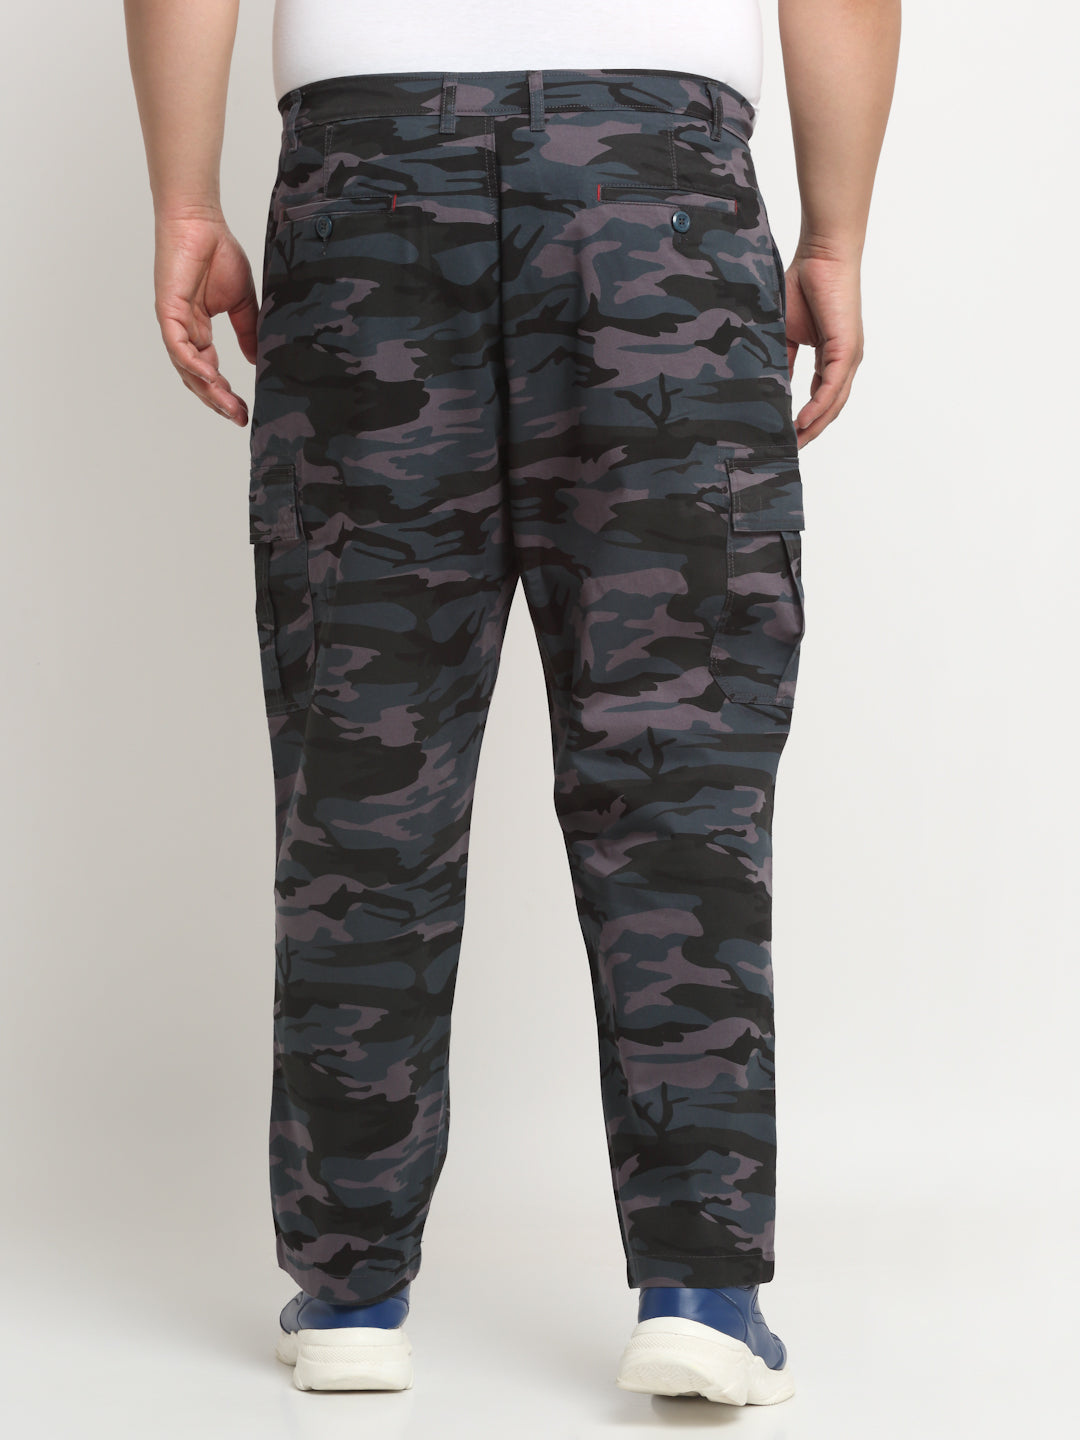 plusS Men Olive Green And Purple Camouflage Printed Cotton Cargo Trousers